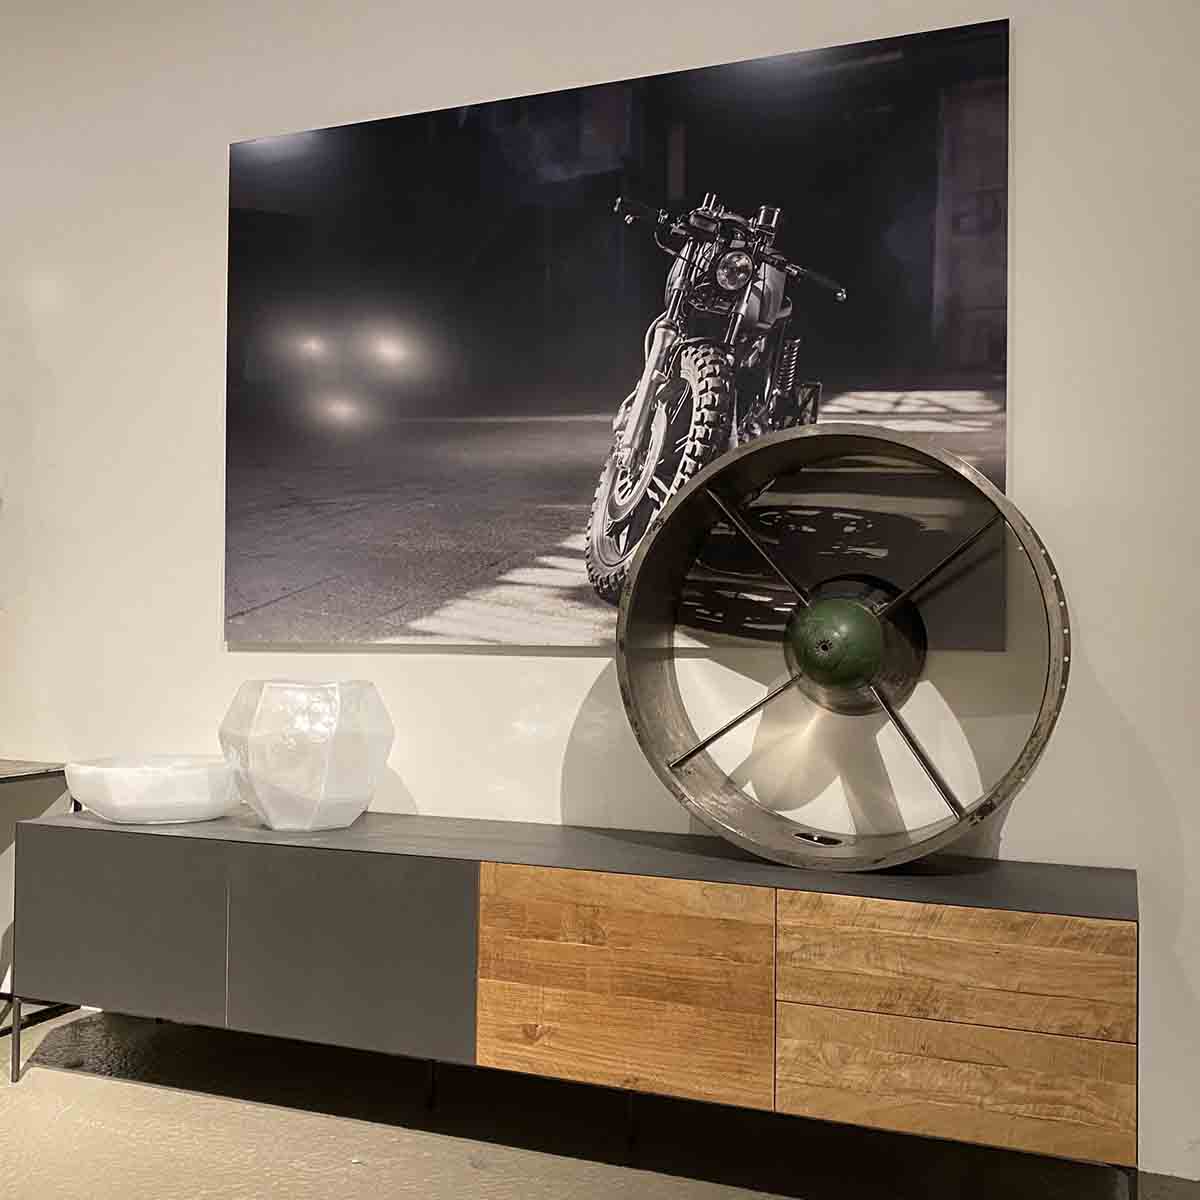 Front body of Klimov RD-33 jet engine as a decorative item in a living room.